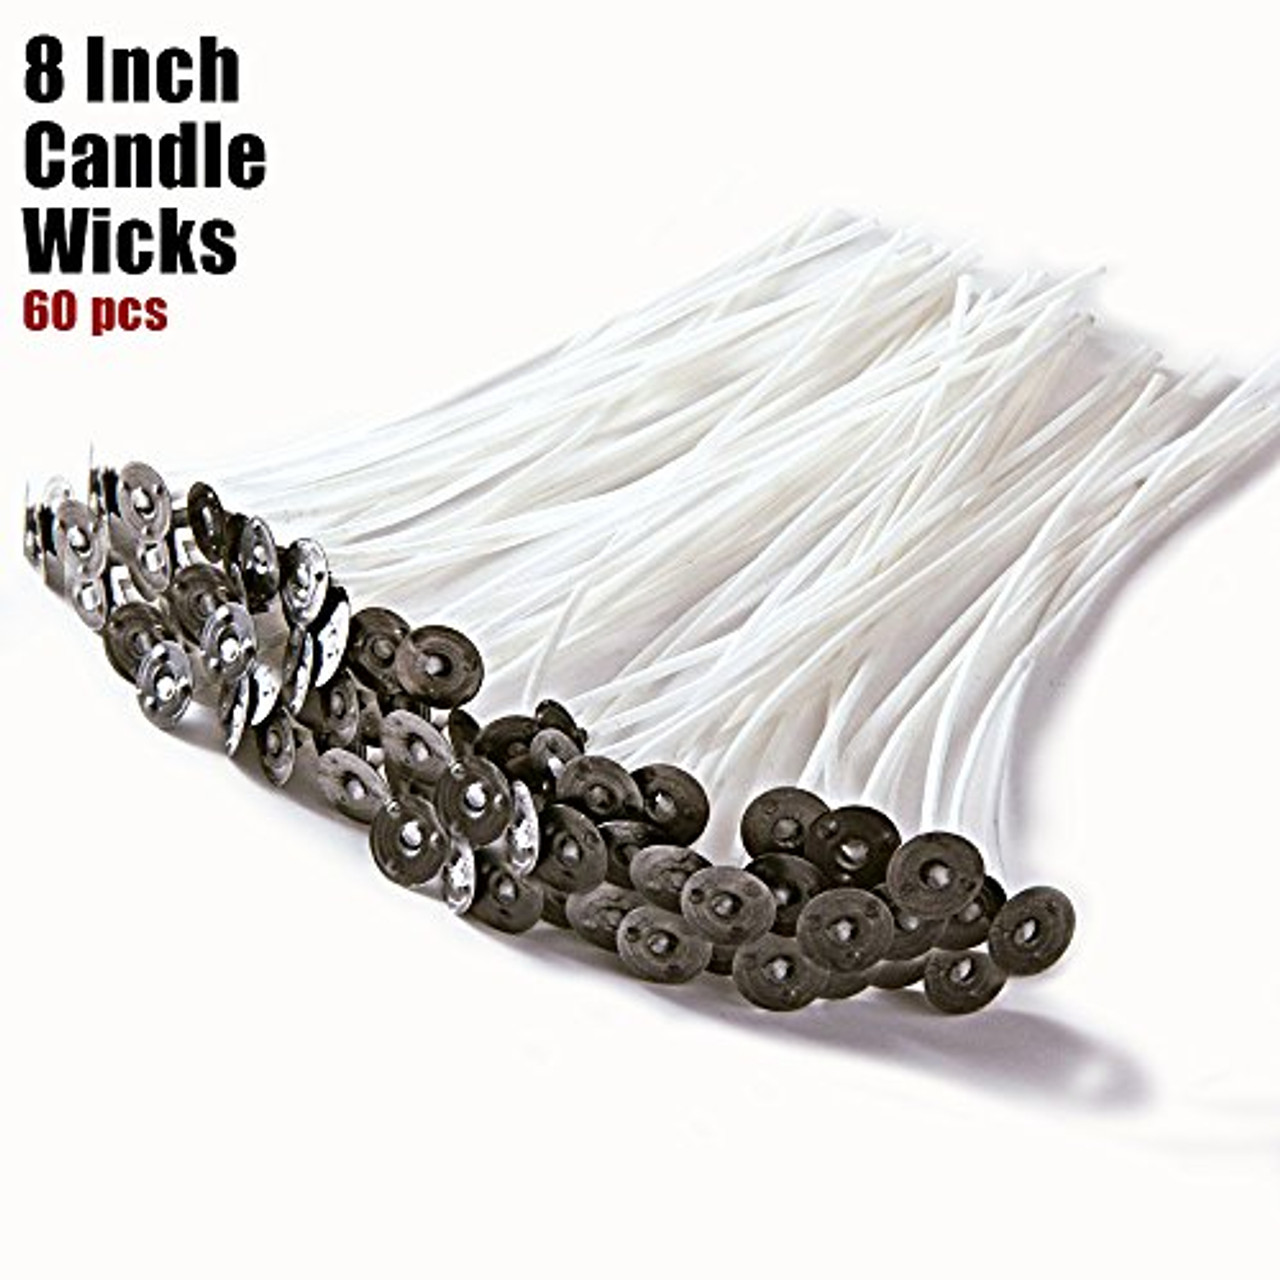 EricX Light 8 inch Candle Wick with Candle Wick Stickers and Candle Wick Centering Device,60 Pcs for Candle Making